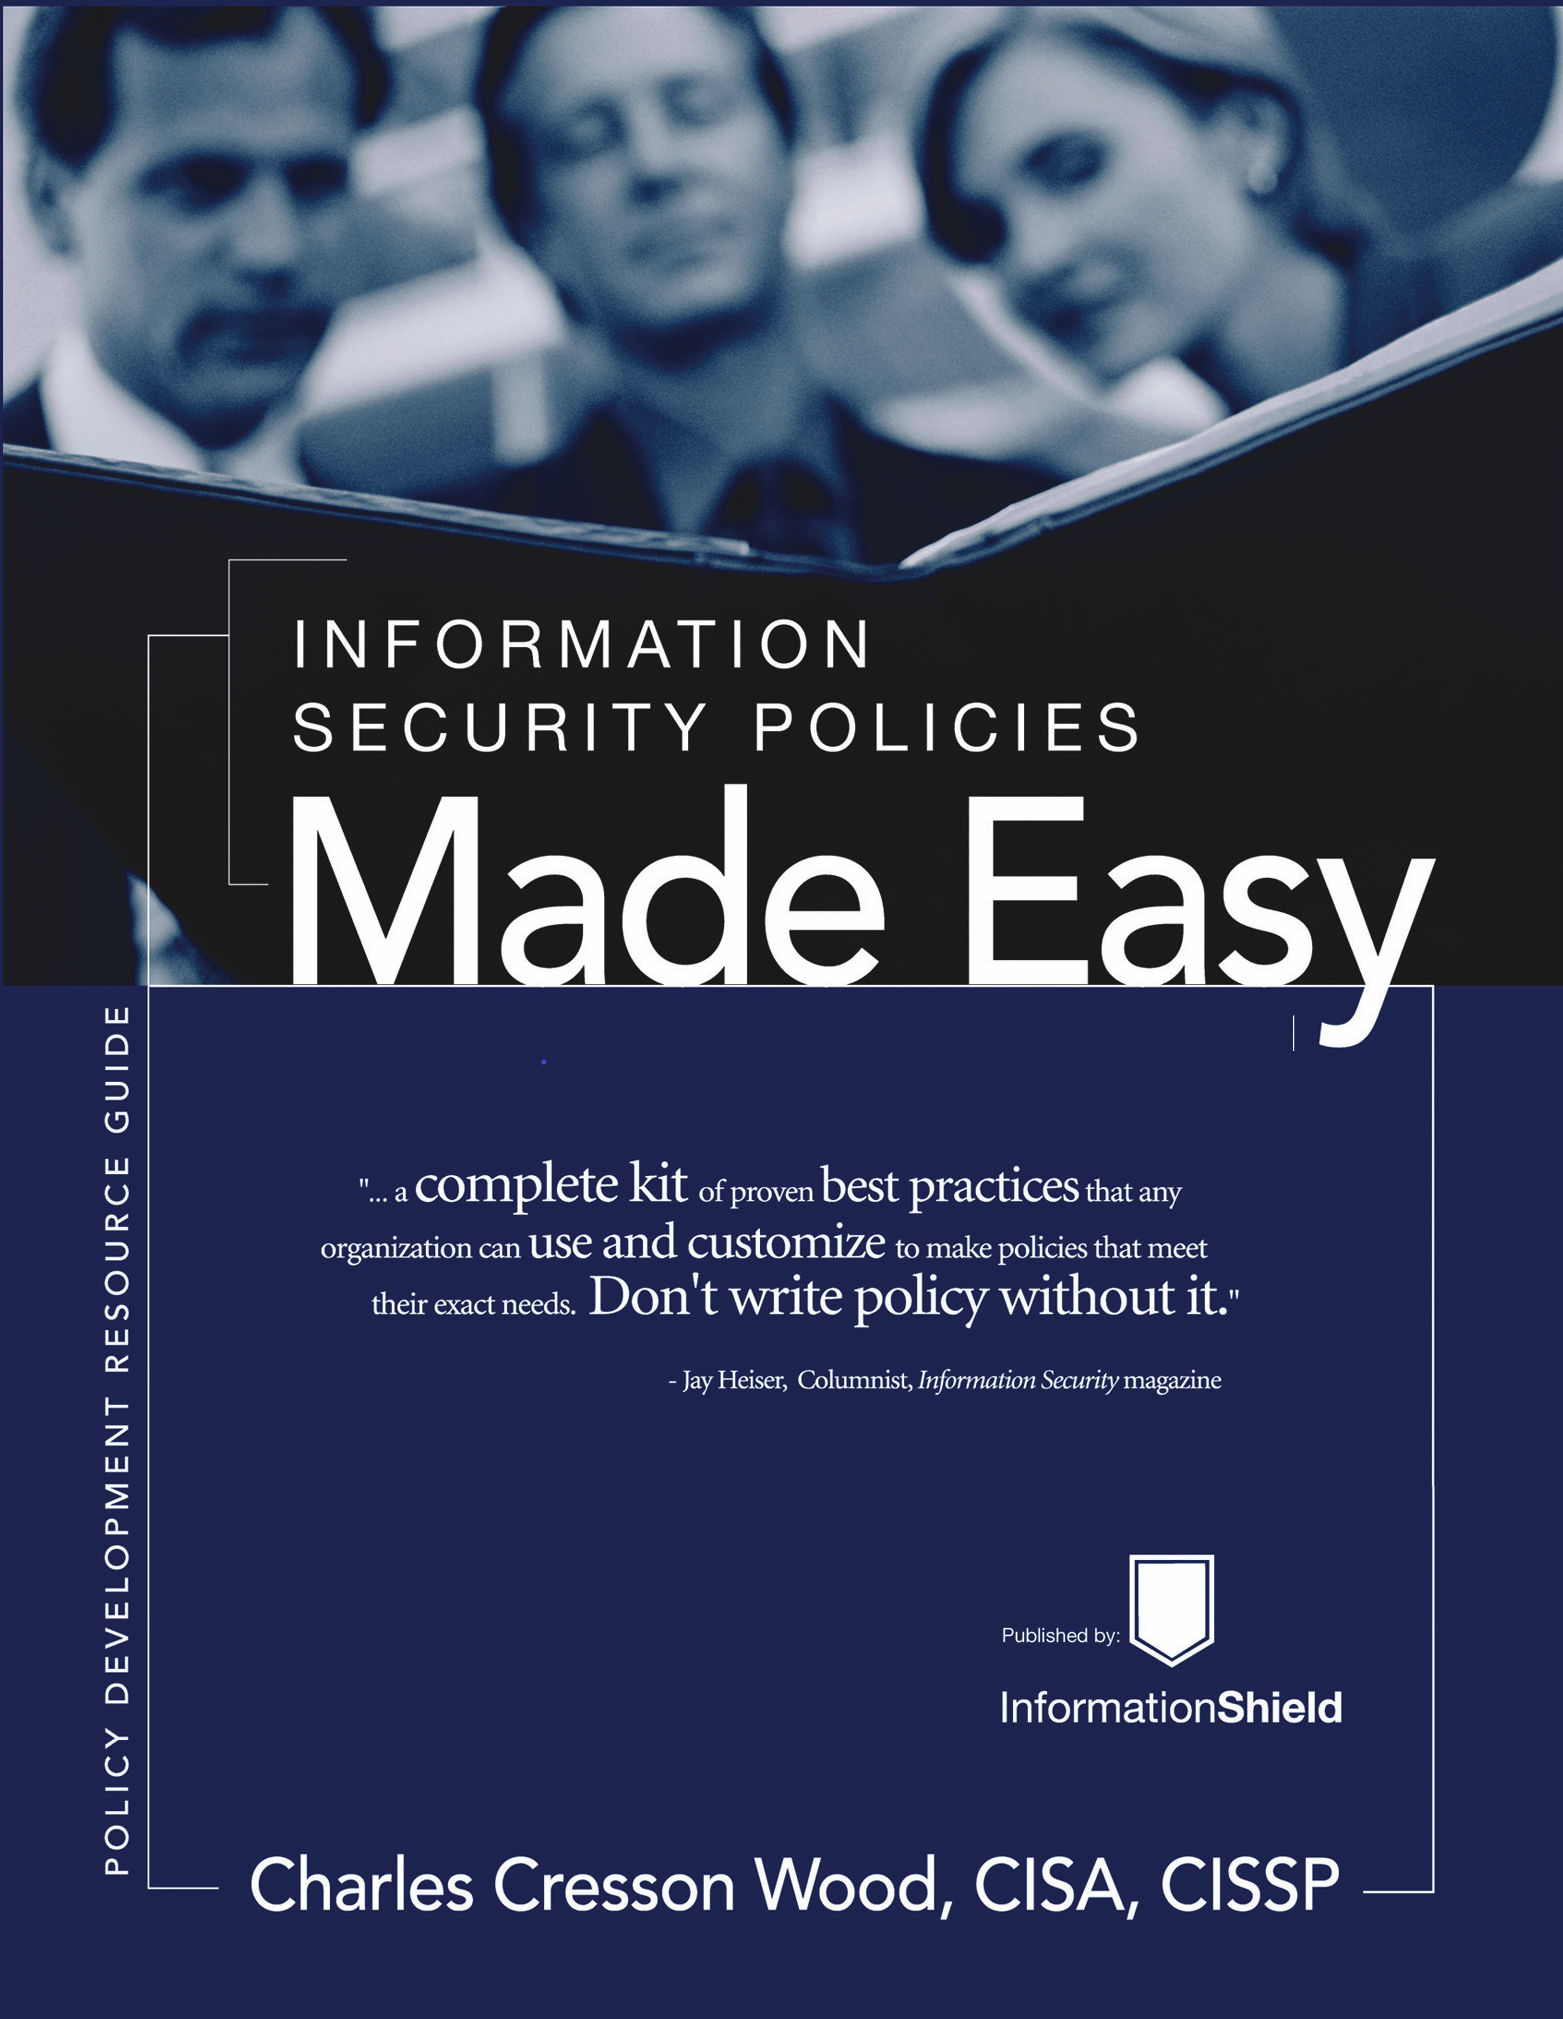 information-security-policies-made-easy-rothstein-publishing